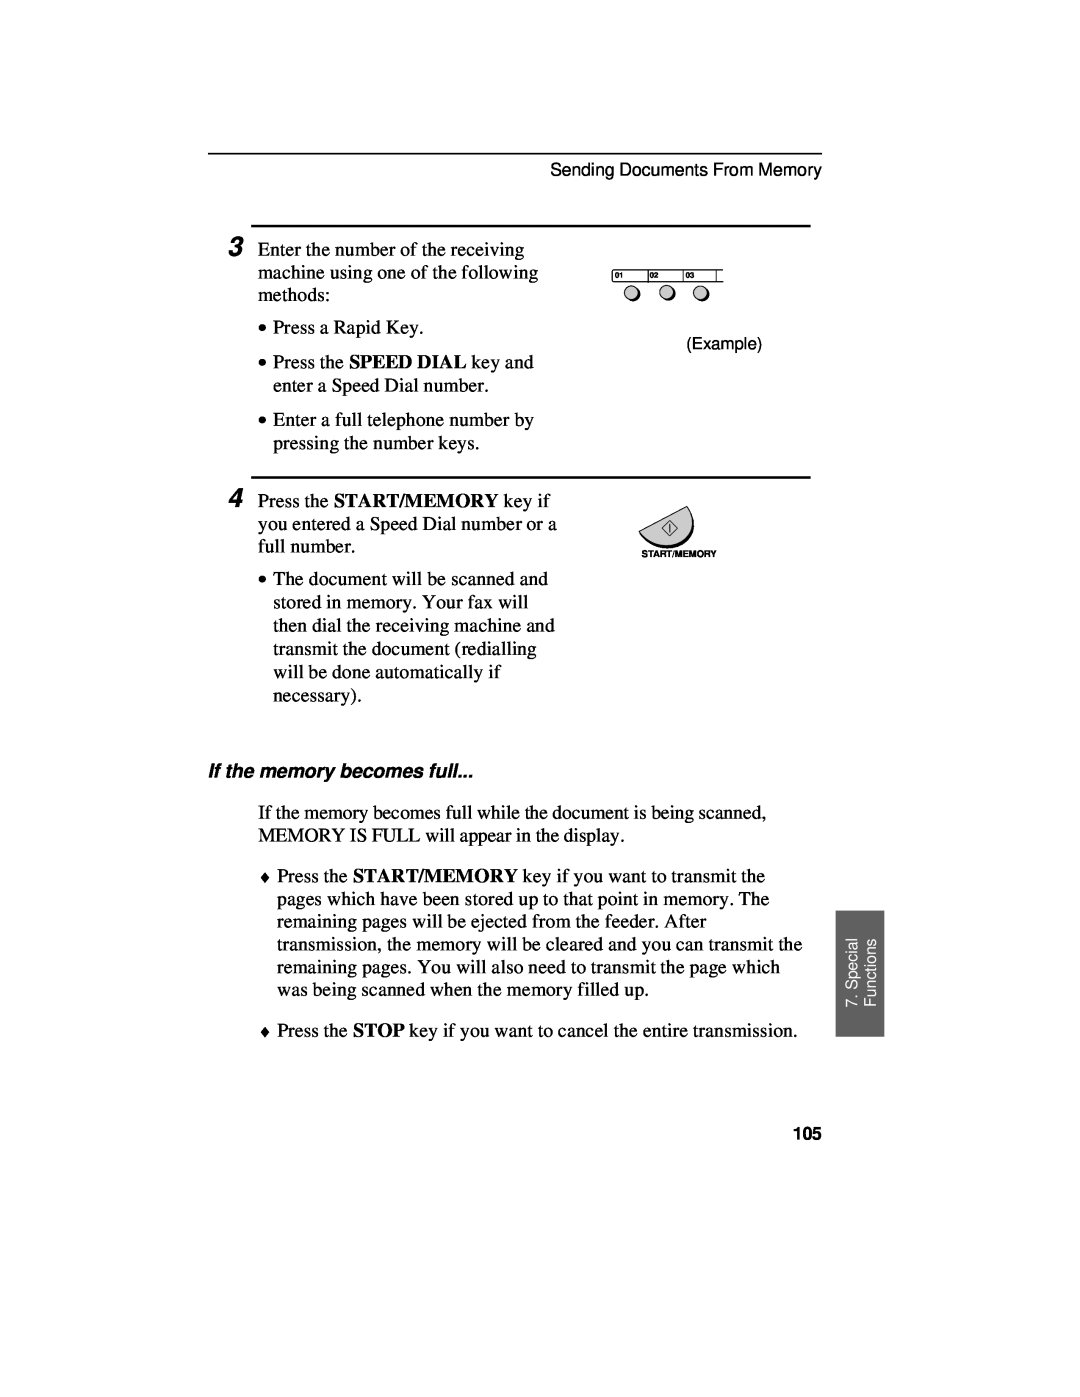 Sharp UX-460 operation manual full number, If the memory becomes full 